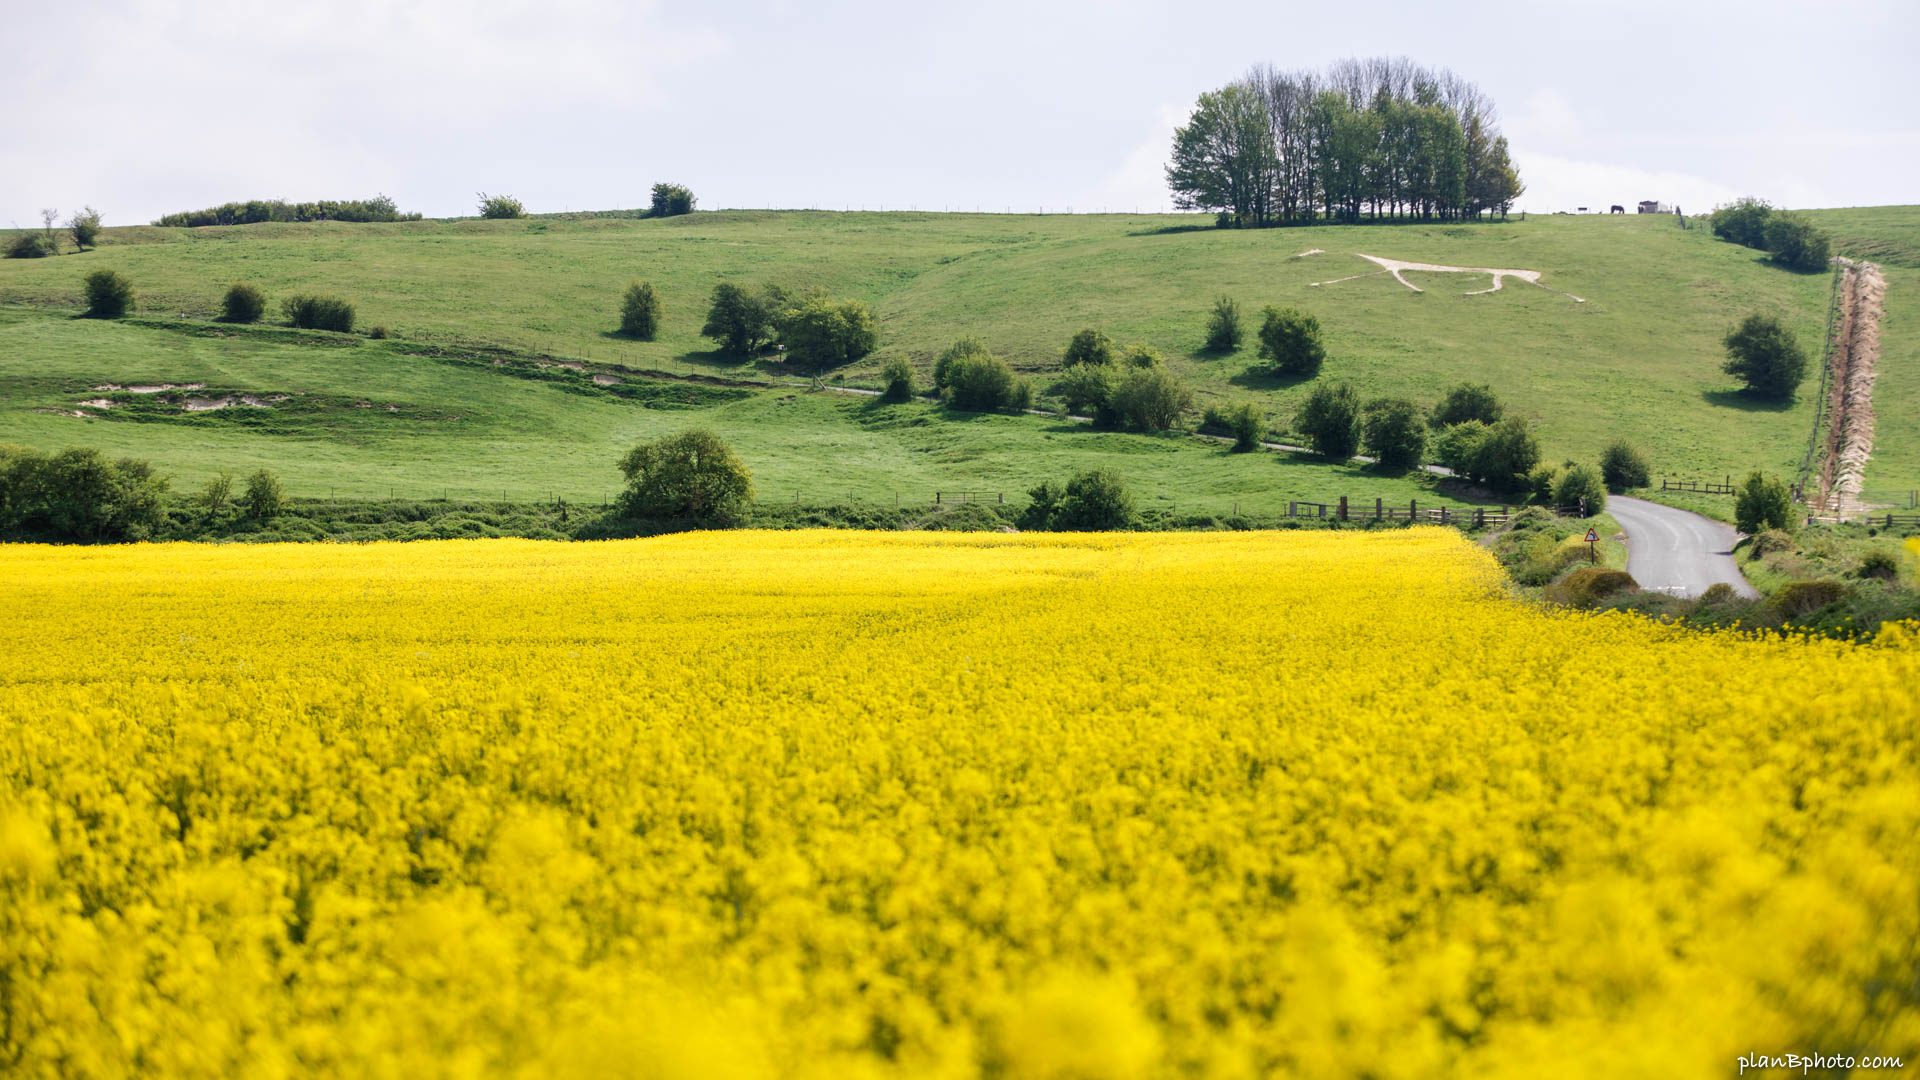 Yellow canola field in England near a white horse